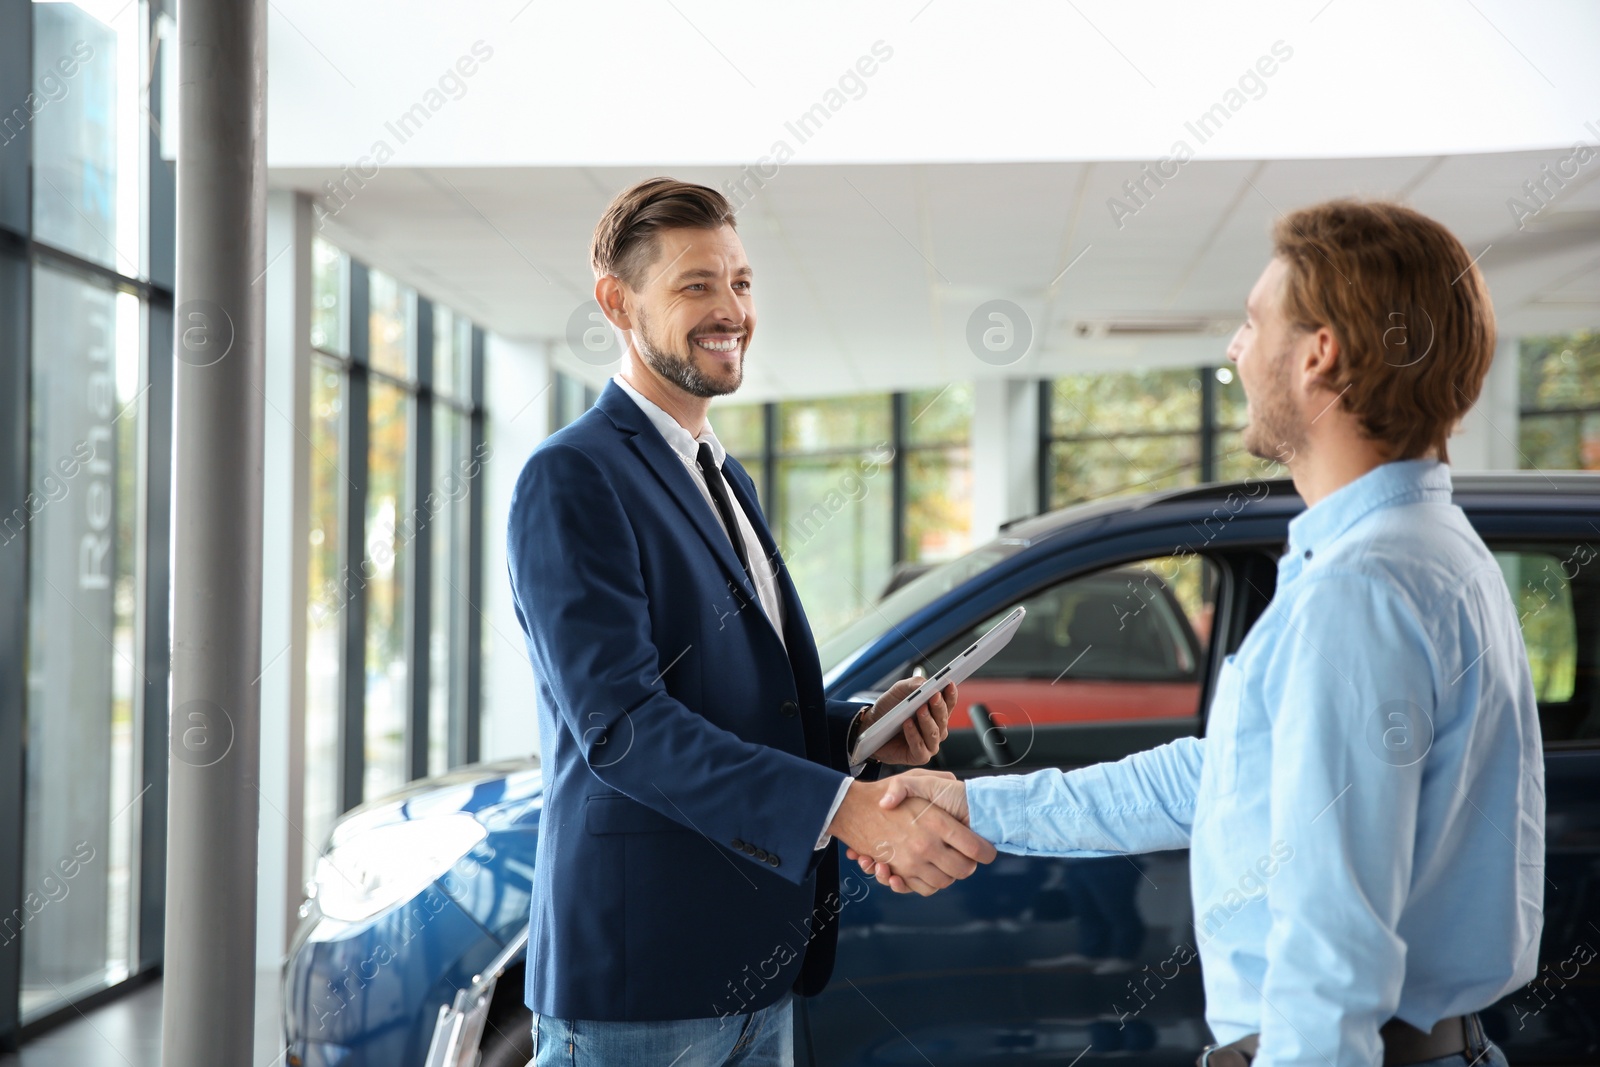 Photo of Customer and salesman shaking hands in car dealership